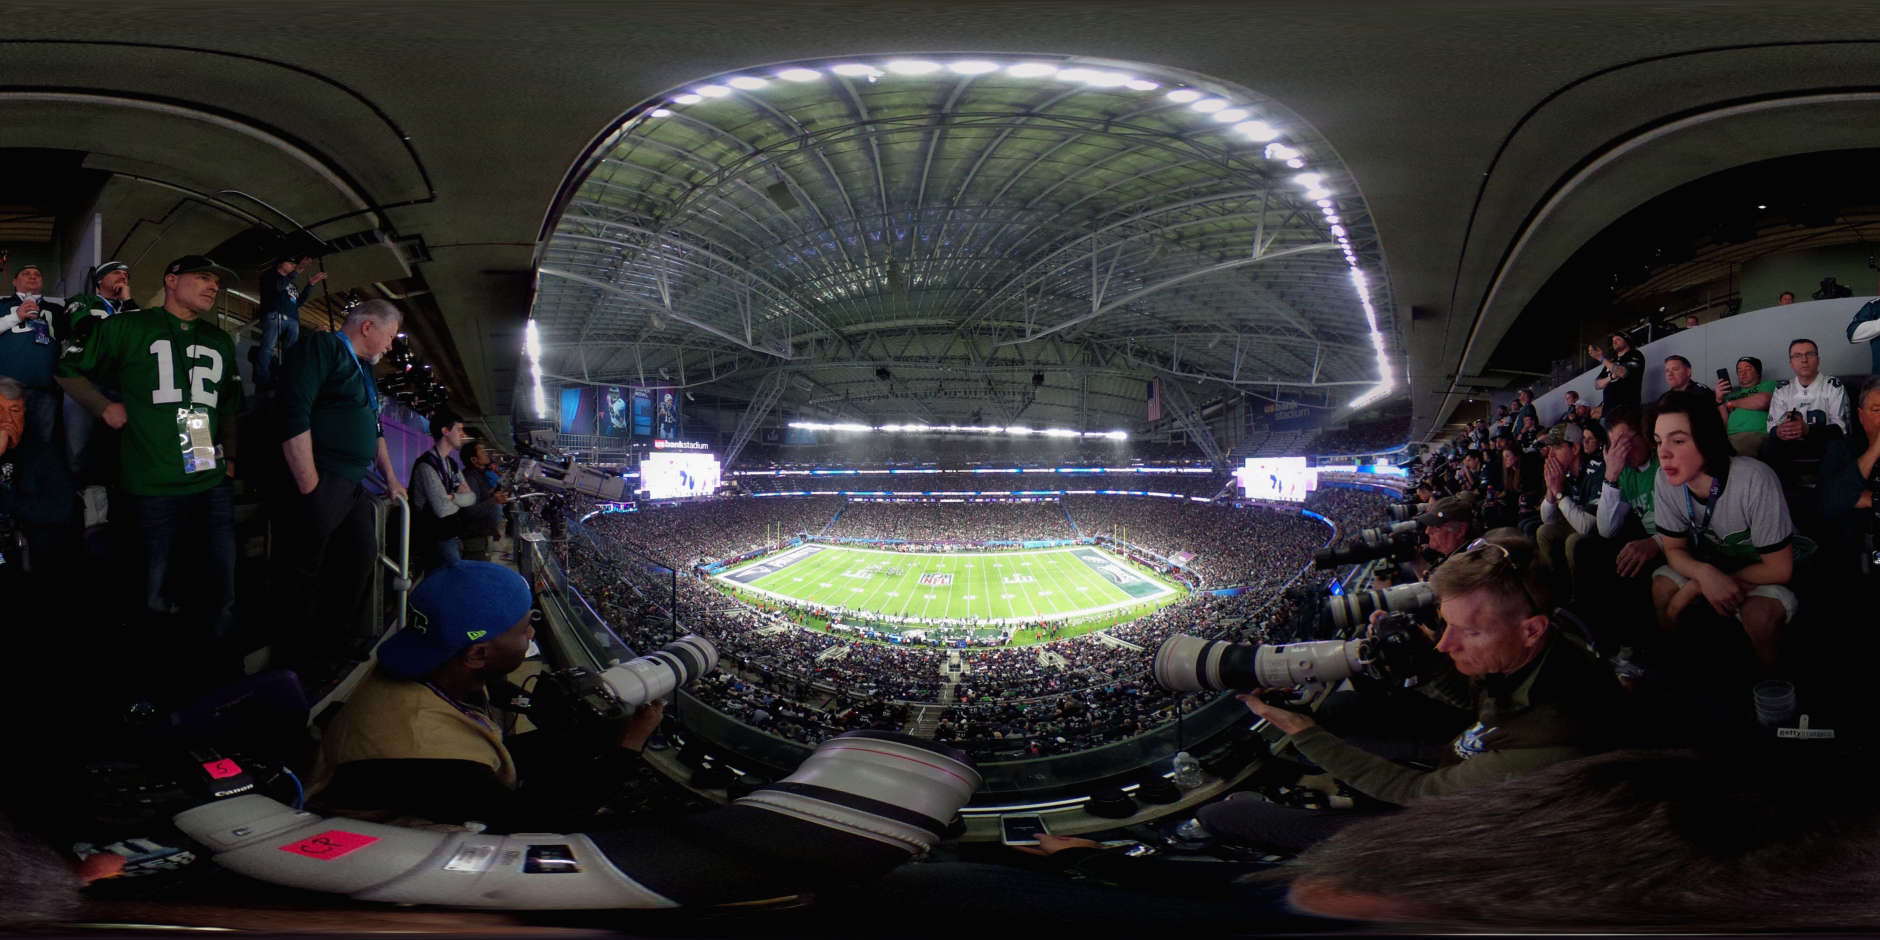 MINNEAPOLIS, MN - FEBRUARY 04: (EDITOR'S NOTE: Image was created as an Equirectangular Panorama. Import image into a panoramic player to create an interactive 360 degree view.) The Philadelphia Eagles play the New England Patriots in third quarter of Super Bowl LII at U.S. Bank Stadium on February 4, 2018 in Minneapolis, Minnesota.  (Photo by Christian Petersen/Getty Images)